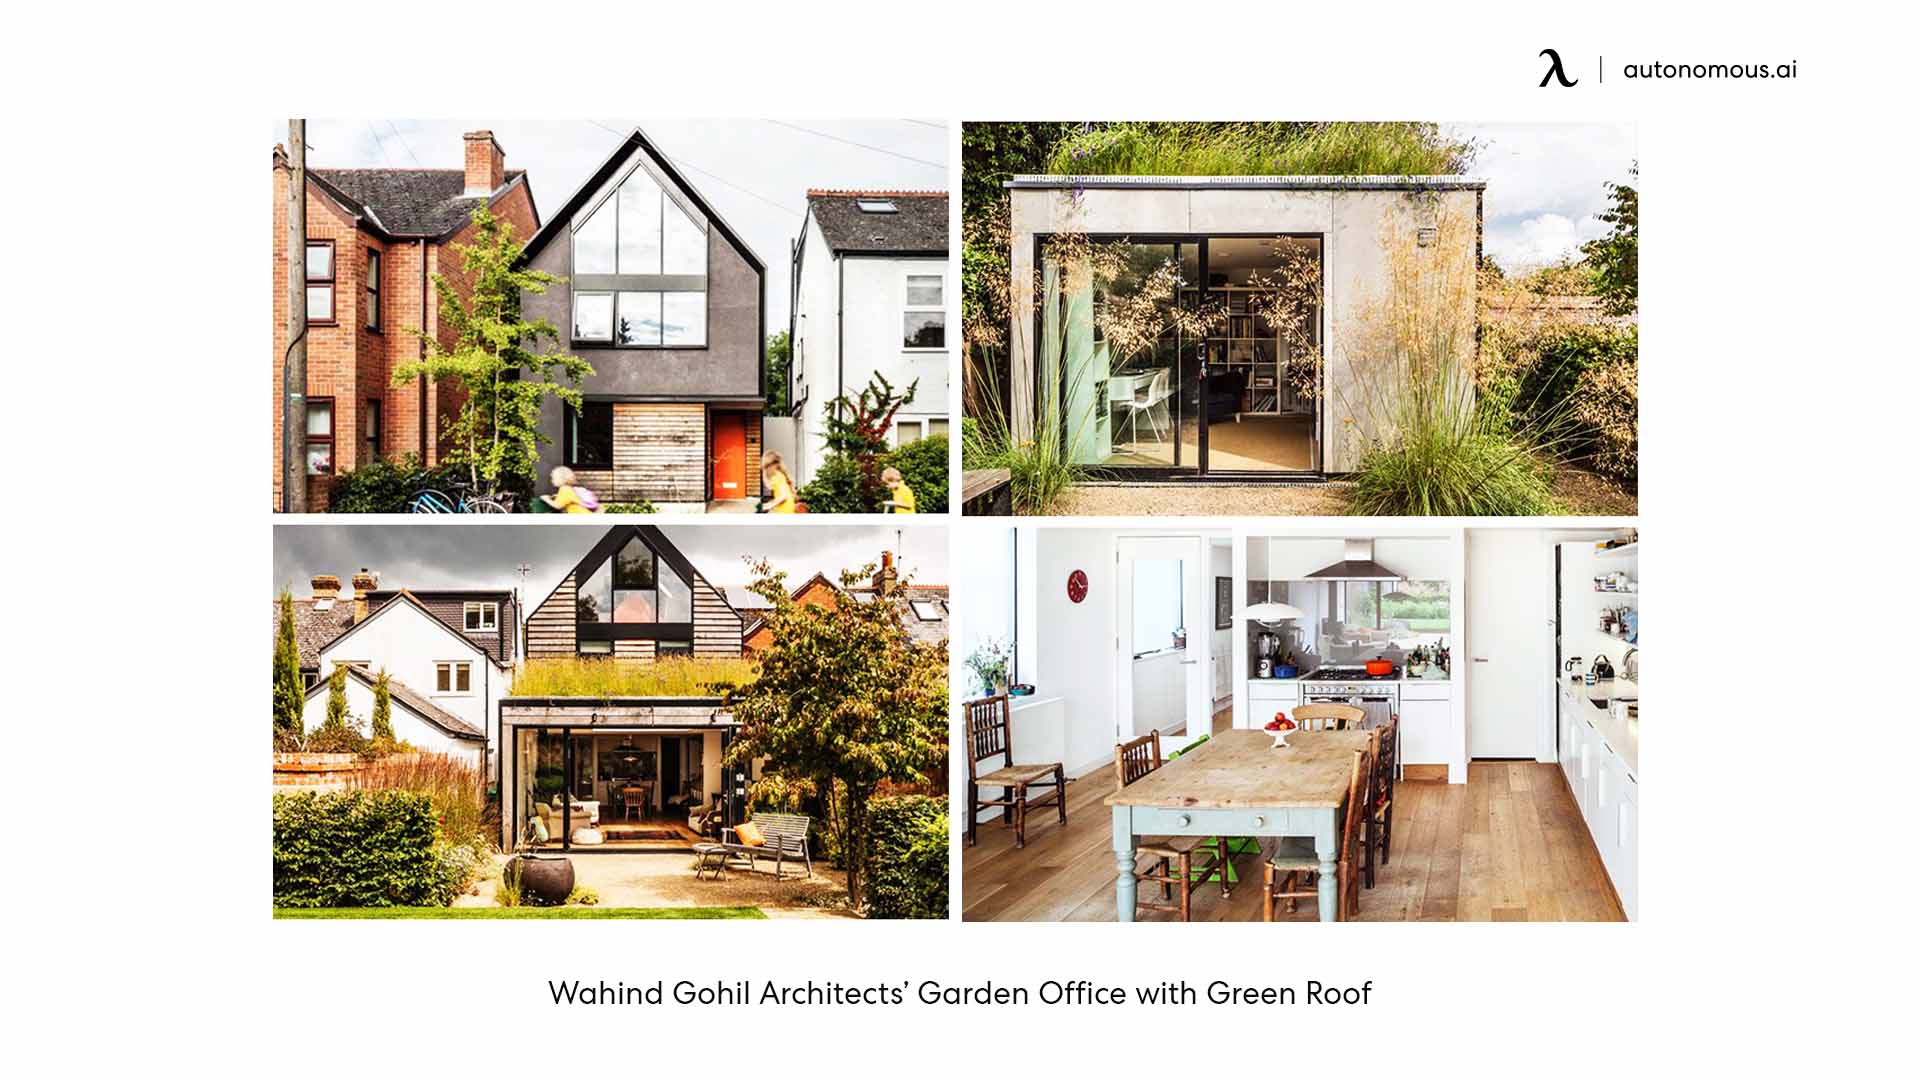 Wahind Gohil Architects’ Garden Office with Green Roof